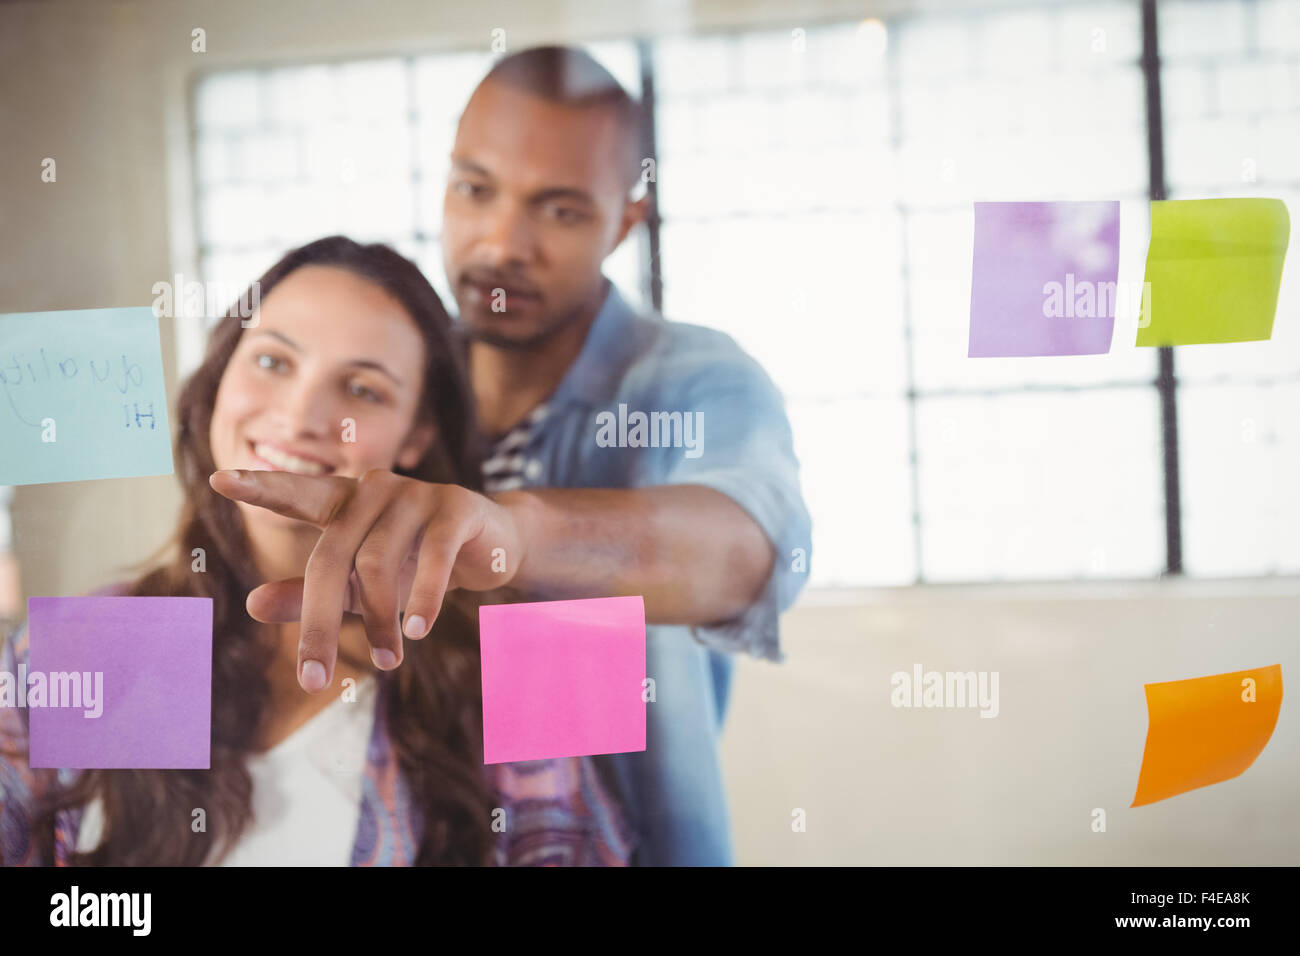 Man showing sticky note to woman Stock Photo